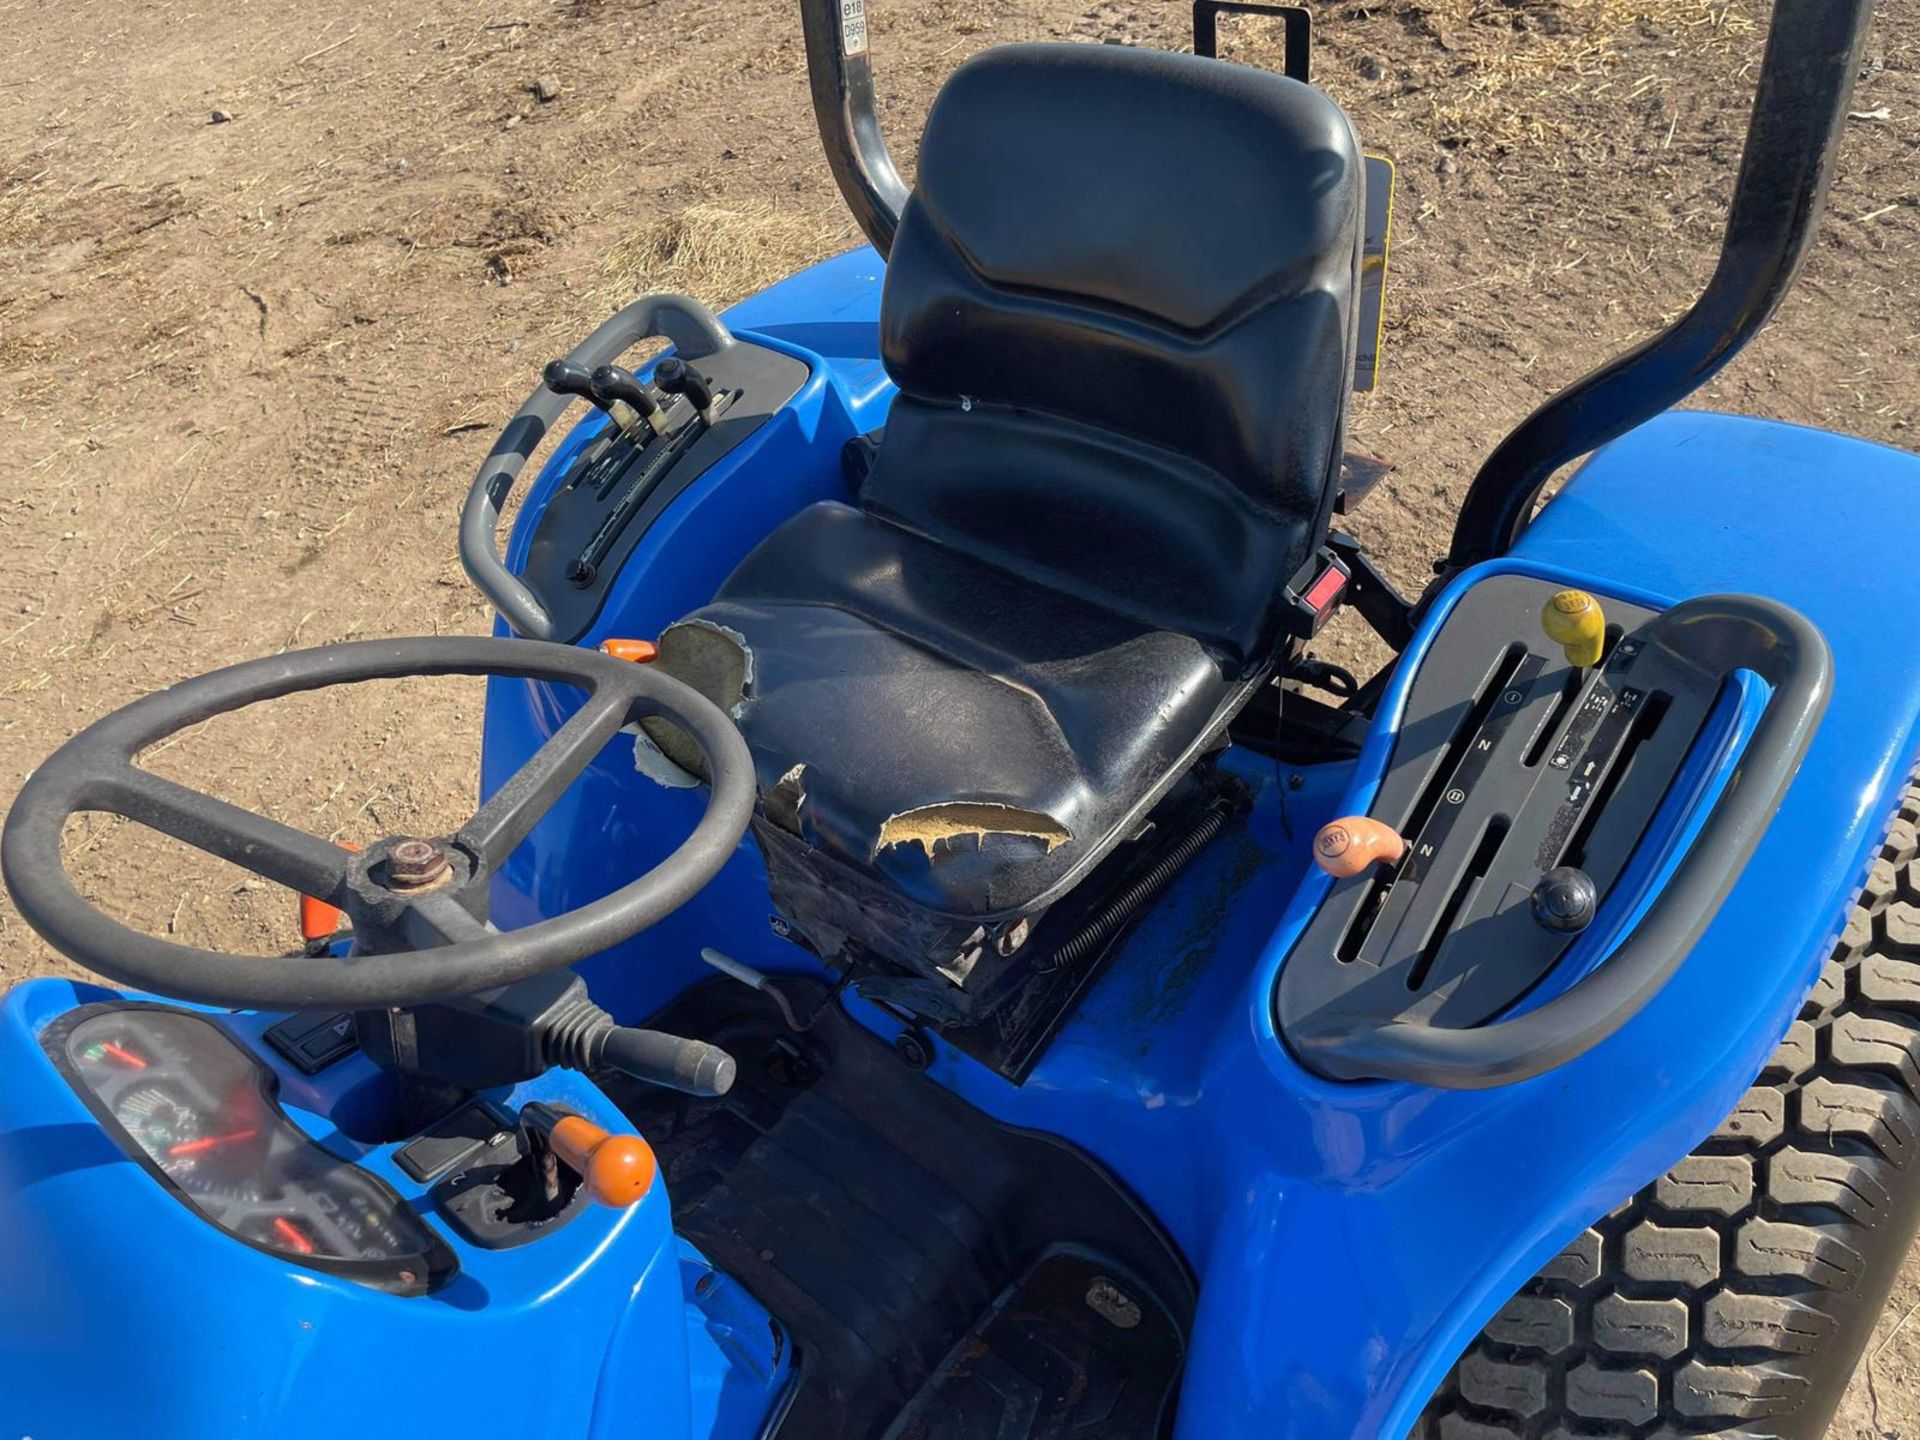 2005 NEW HOLLAND TC27DA 27hp 4WD COMPACT TRACTOR, RUNS DRIVES AND WORKS WELL, ROAD REGISTERED - Image 8 of 13